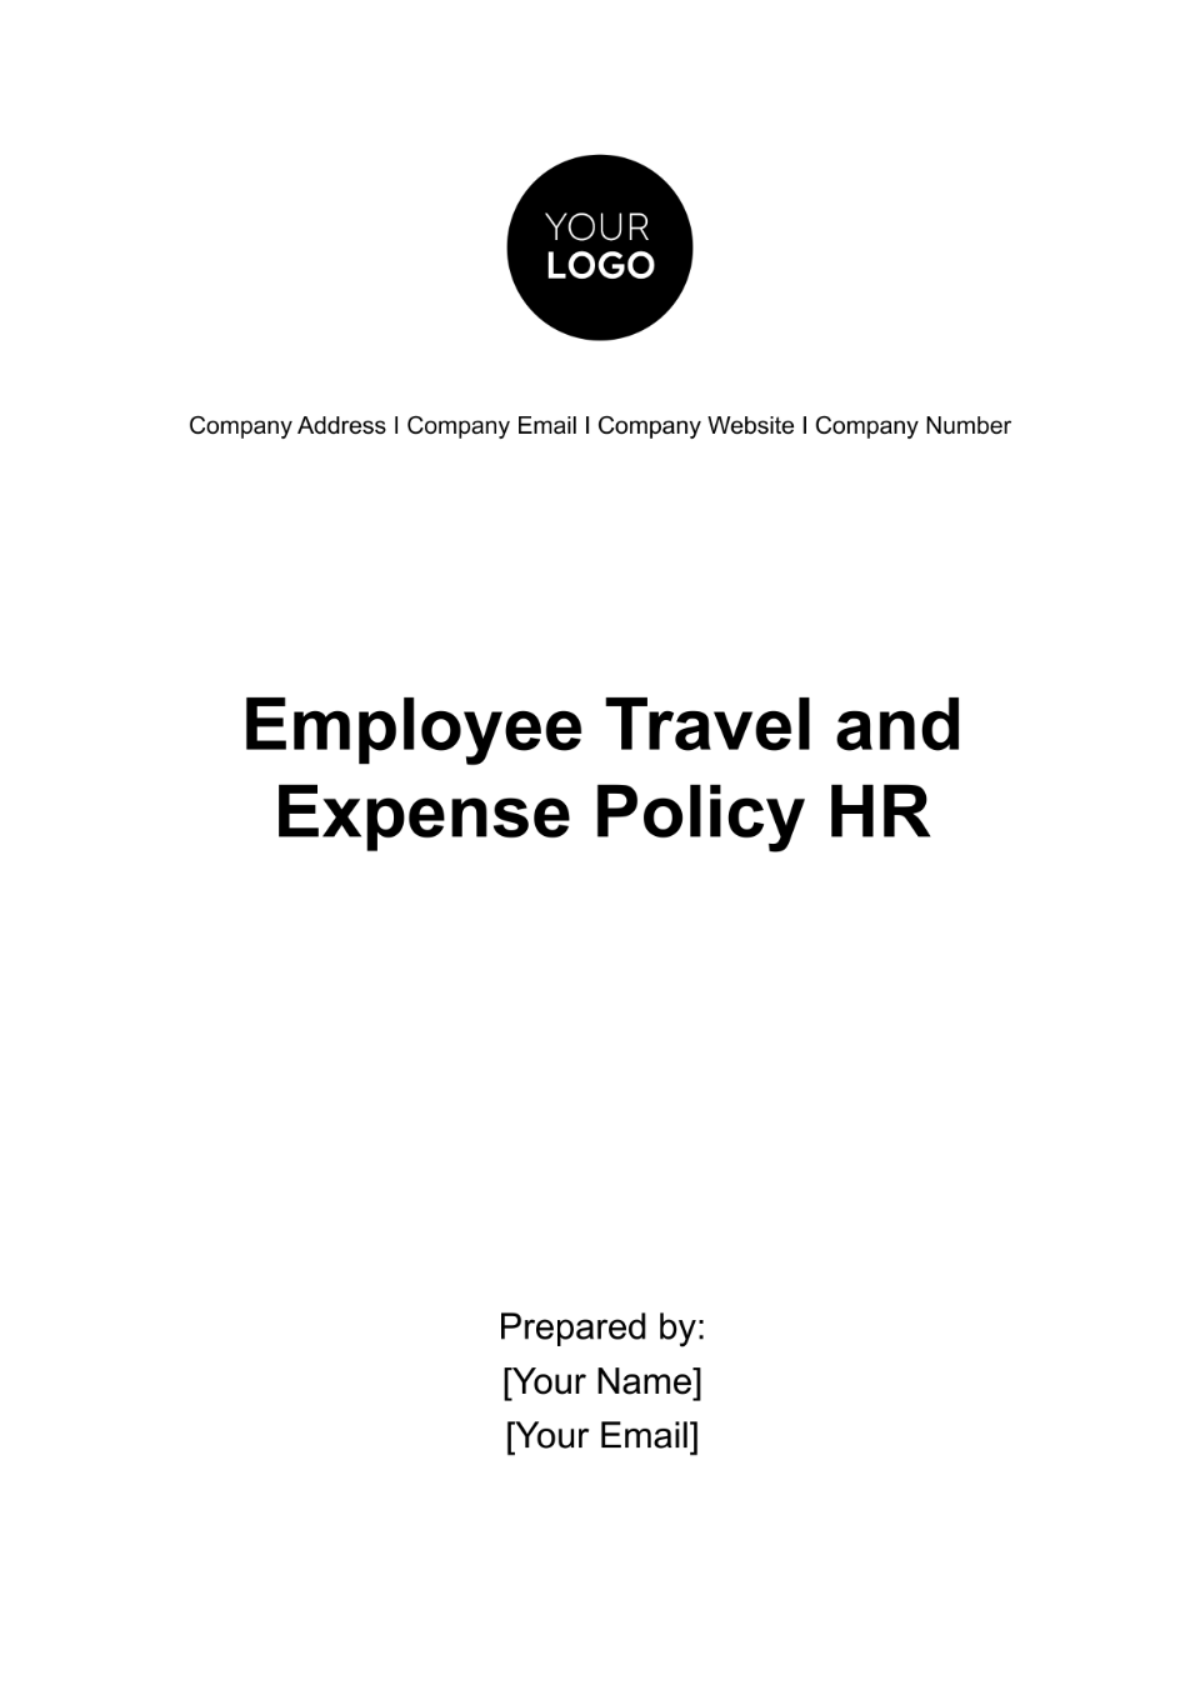 Free Employee Travel and Expense Policy Manual HR Template